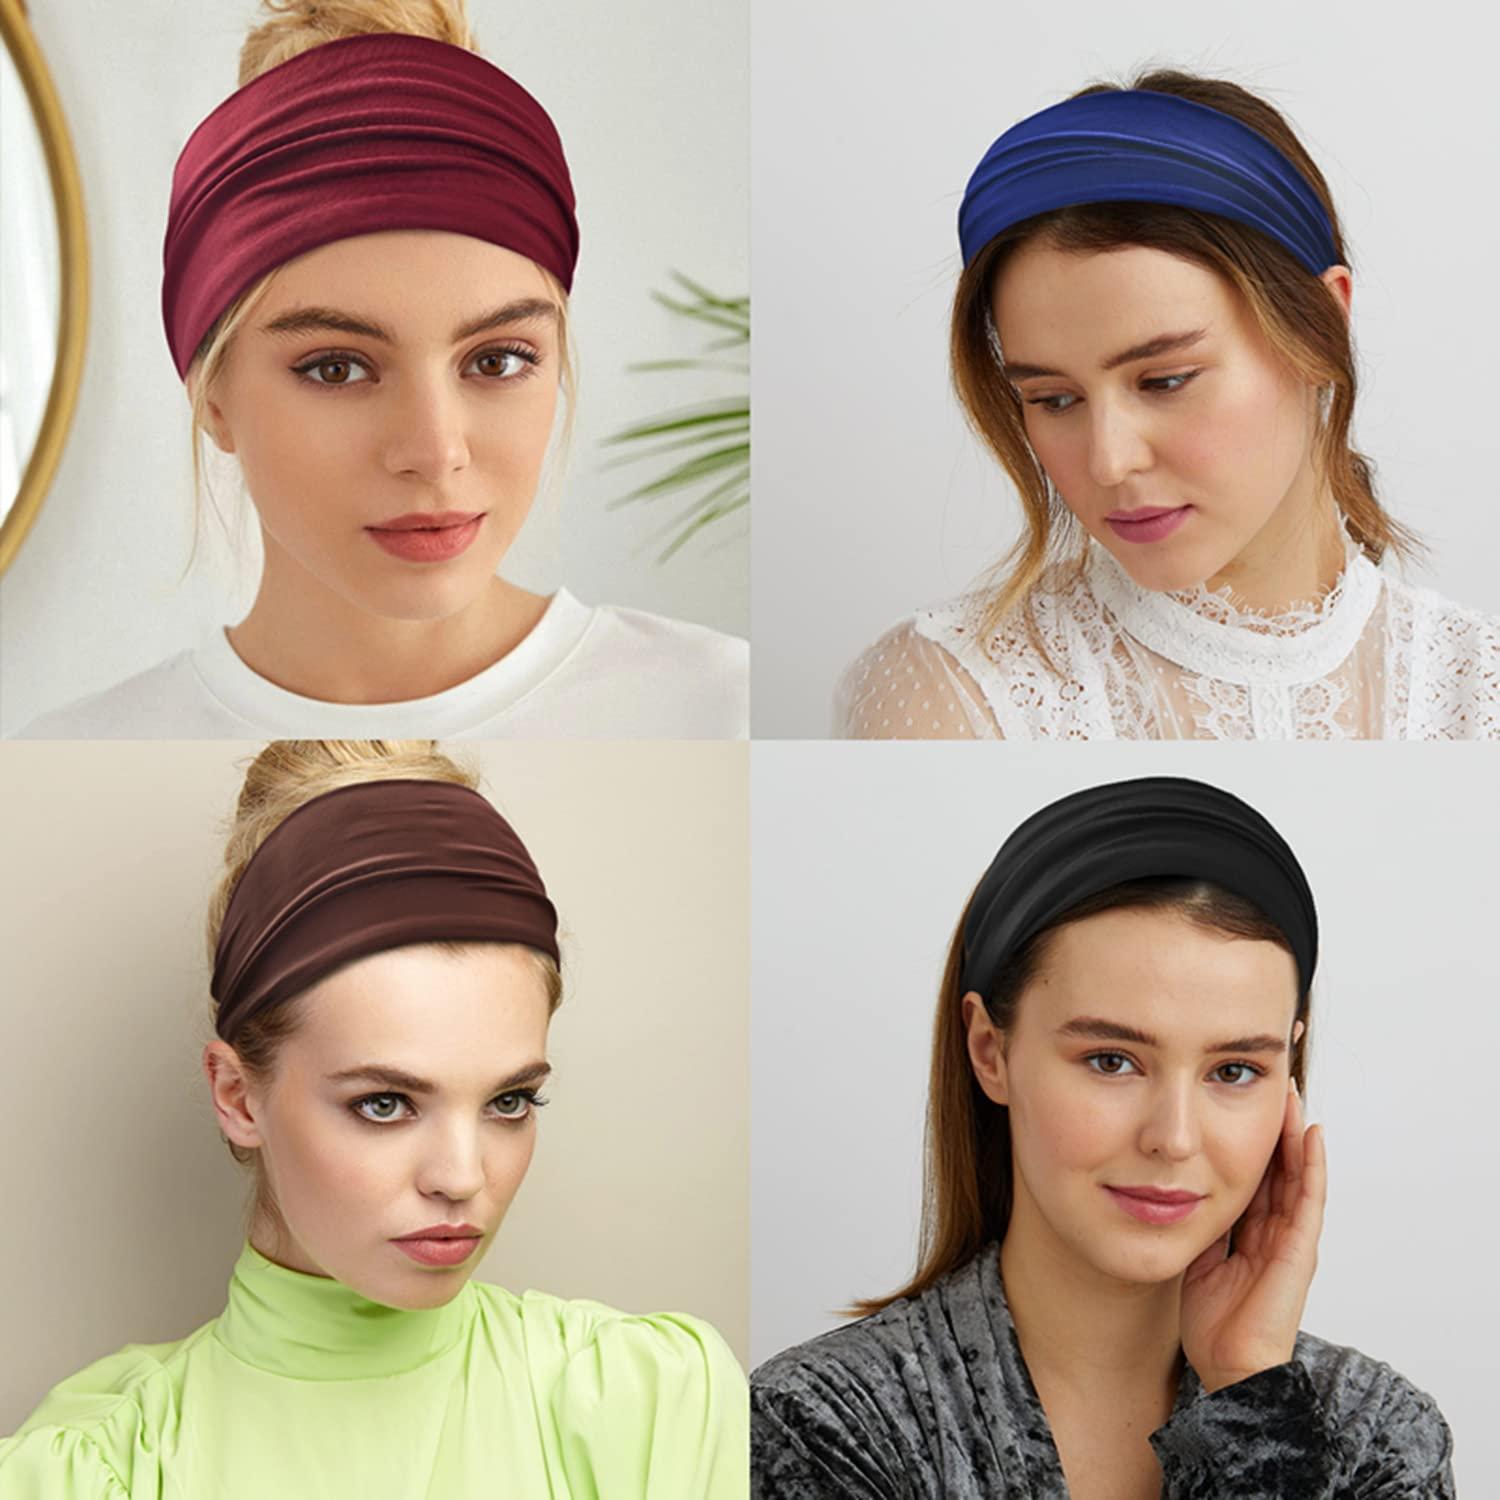 Carede 12 Pack Wide Headbands for Women No slip Stretchy Boho Hair Bands  Soft Elastic Yoga Workout Running Thick Headbands for Women's Hair,Wicking Sweat  Head Bands Solid colors Head Wrap No9Mixed 12